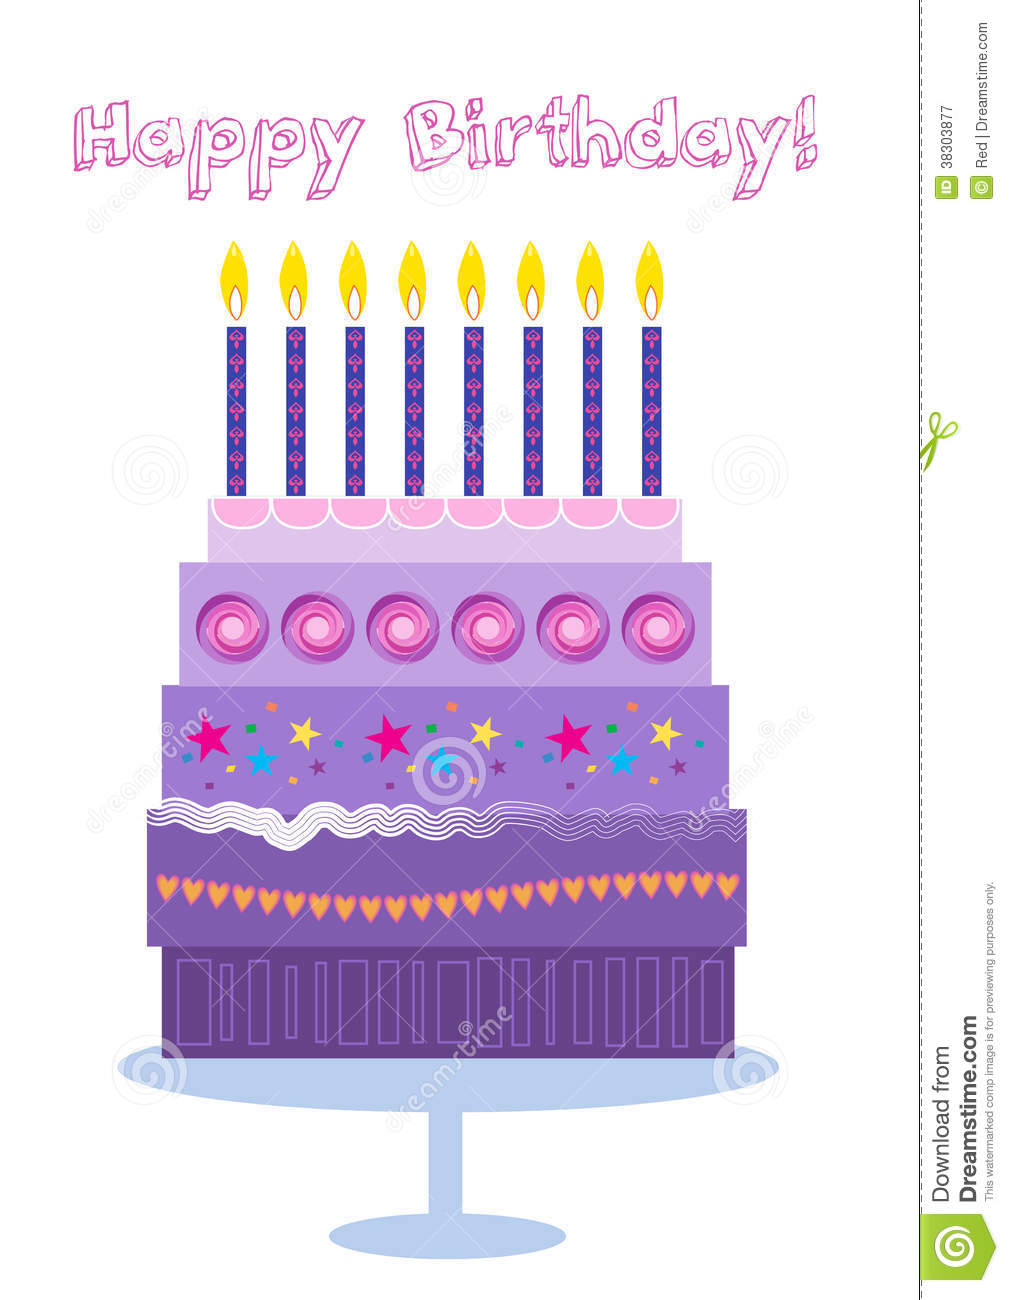 Happy Birthday Cake And Candles Royalty Free Stock Photography   Image